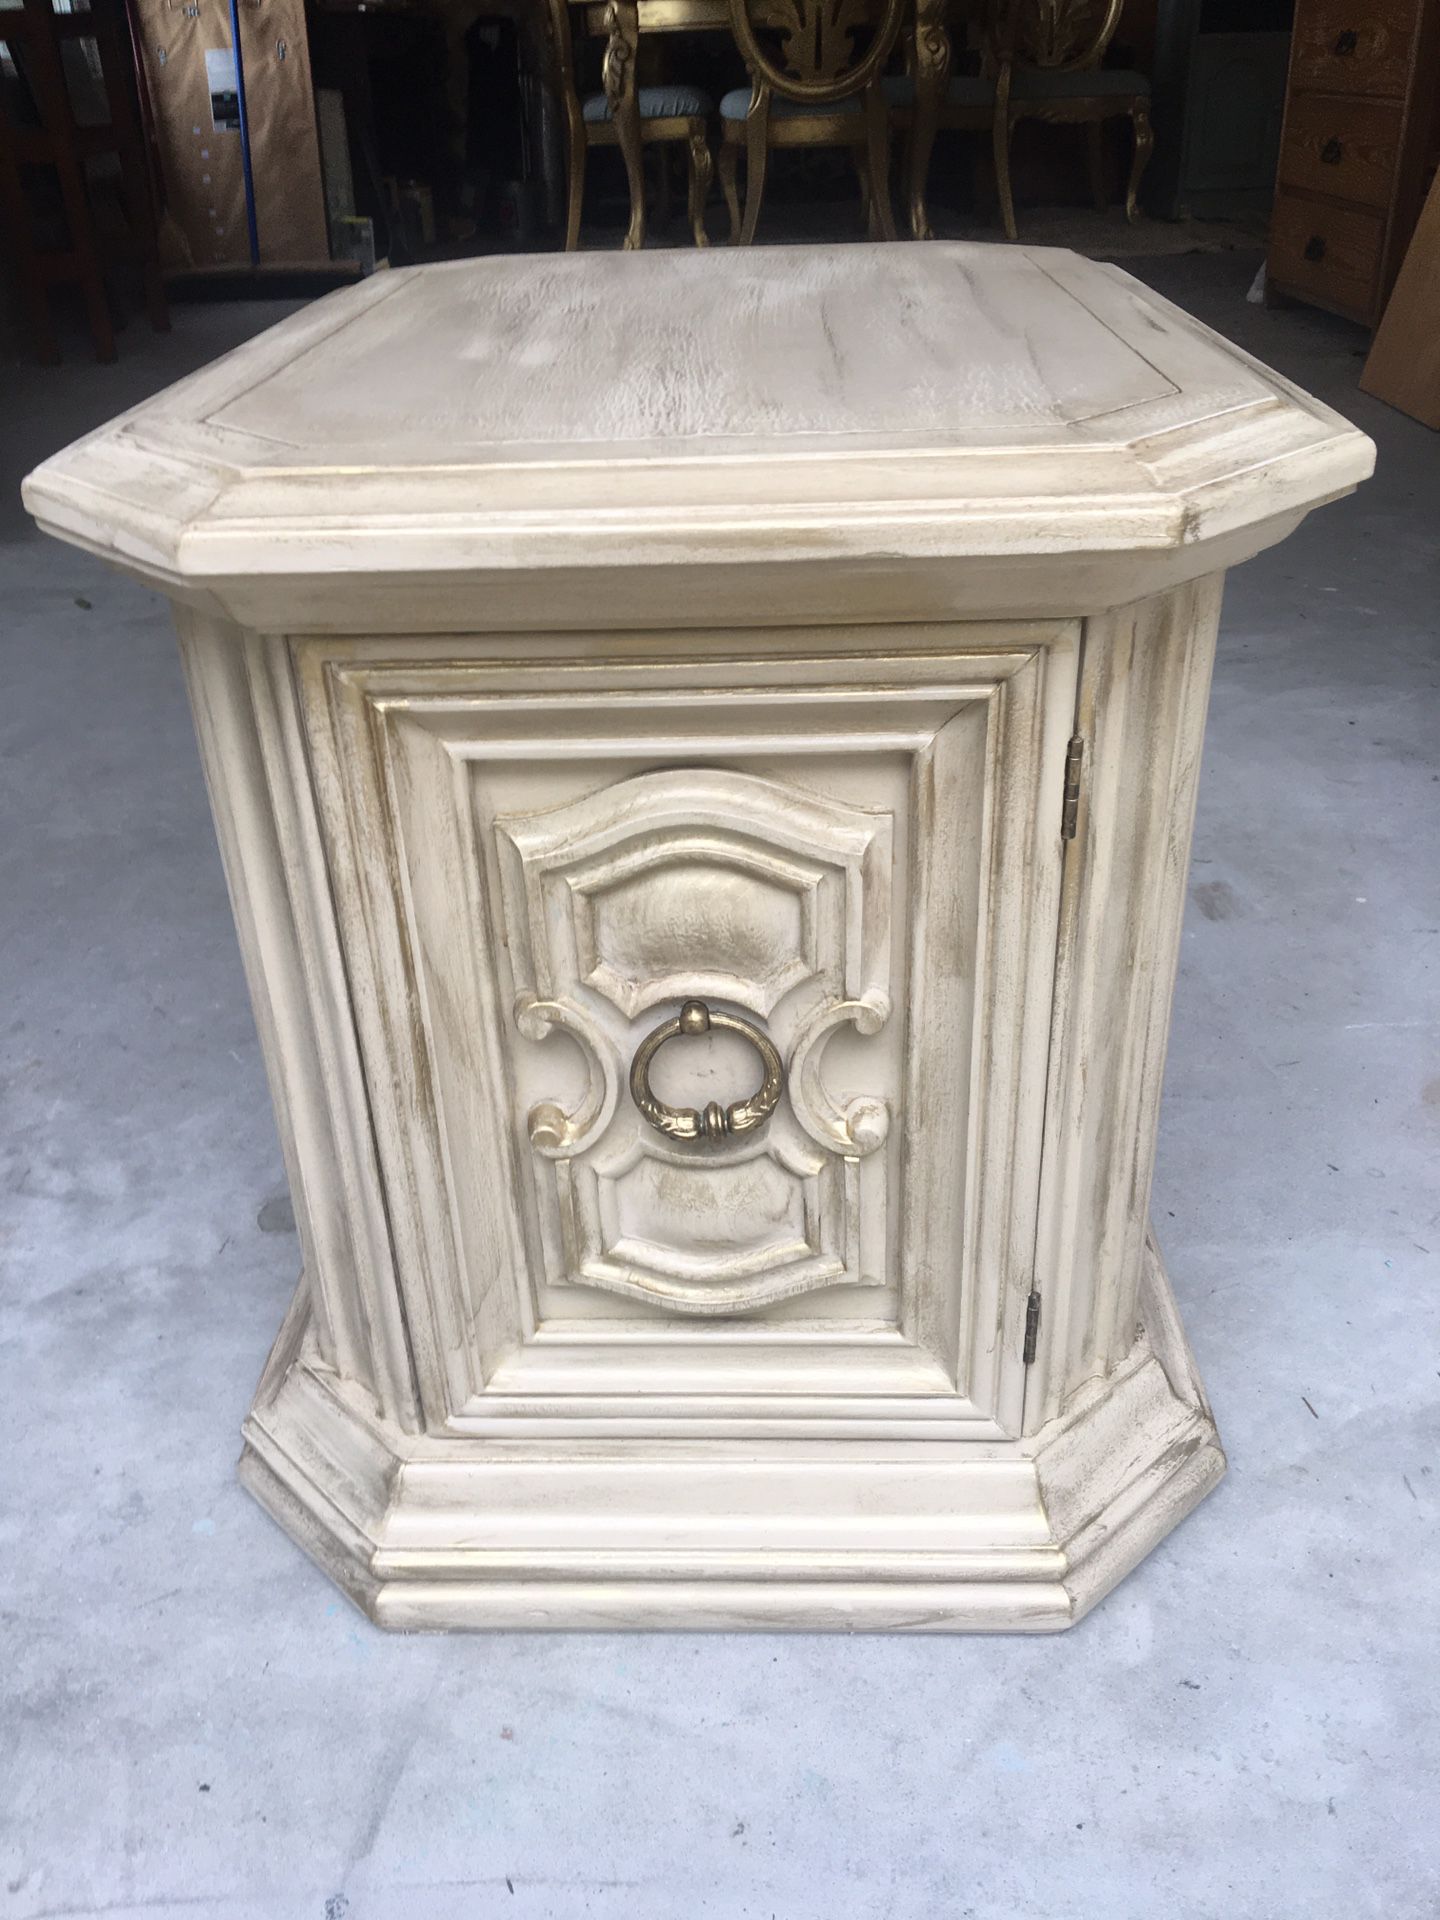 Transformed Solid Wood End / Nightstand Table With Storage. It Has A French Provincial Flair.